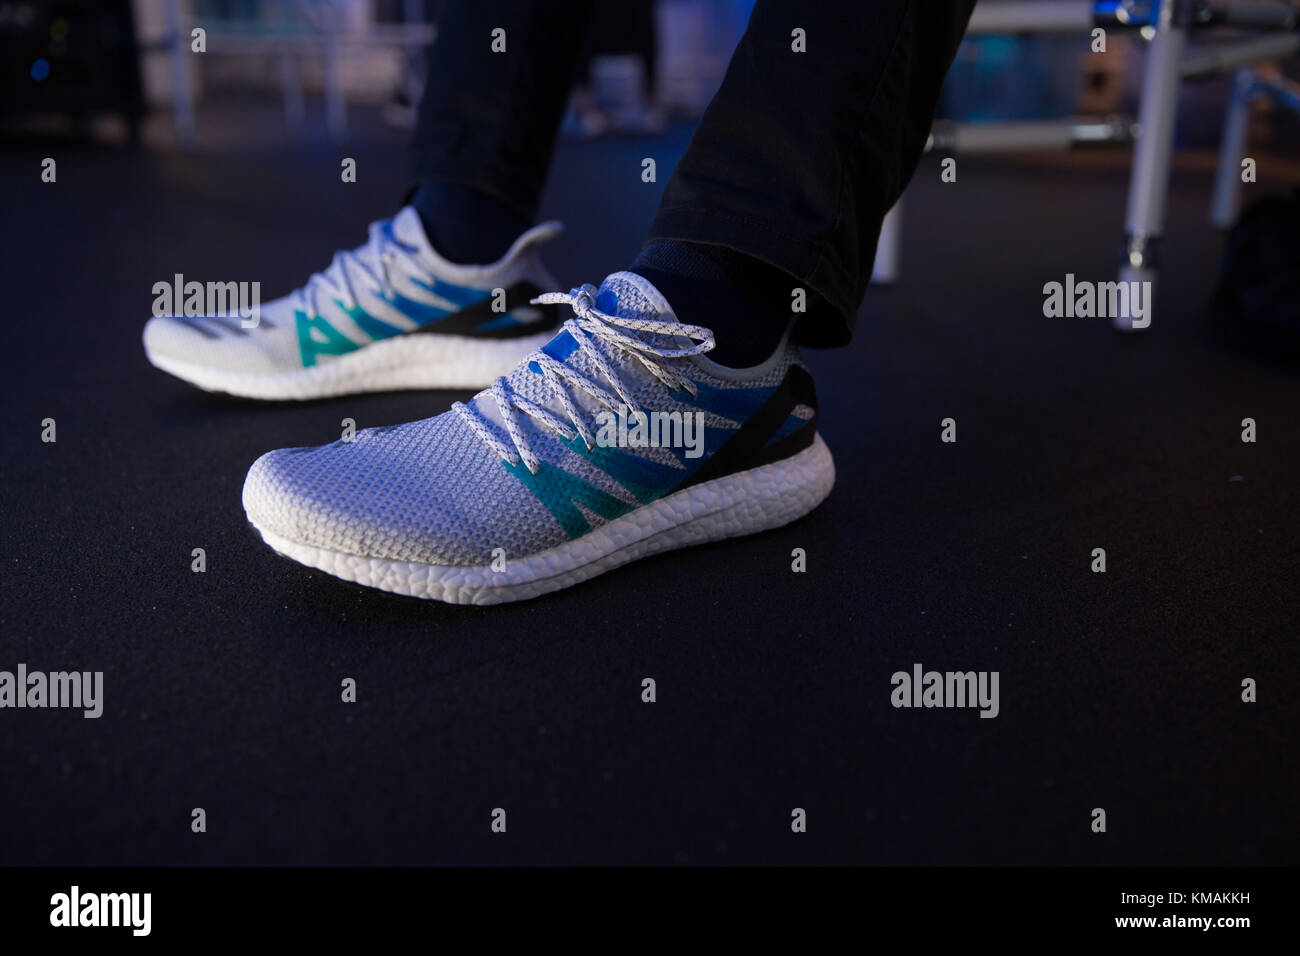 Tech Influencer Super Saf (Safwan Ahmedmia) poses with Adidas Speed Factory trainers at AM4LDN Adidas event Oct 18, 2017 in London Stock Photo